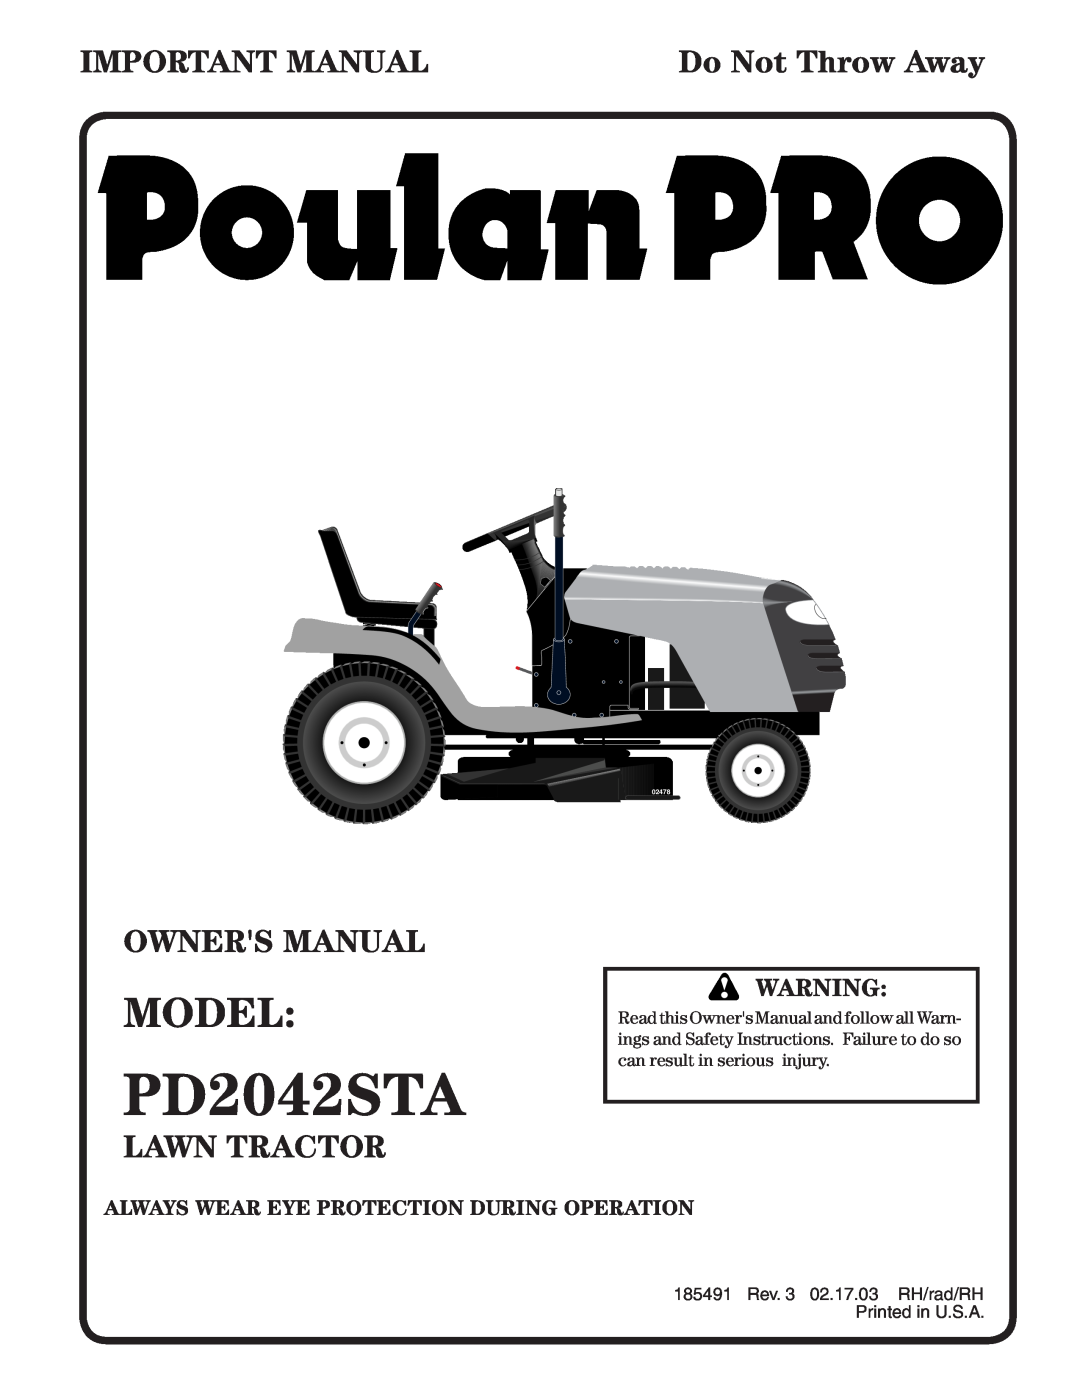 Poulan 185491, 954569707 owner manual PD2042STA, Model, Important Manual, Lawn Tractor, Do Not Throw Away, 02478 